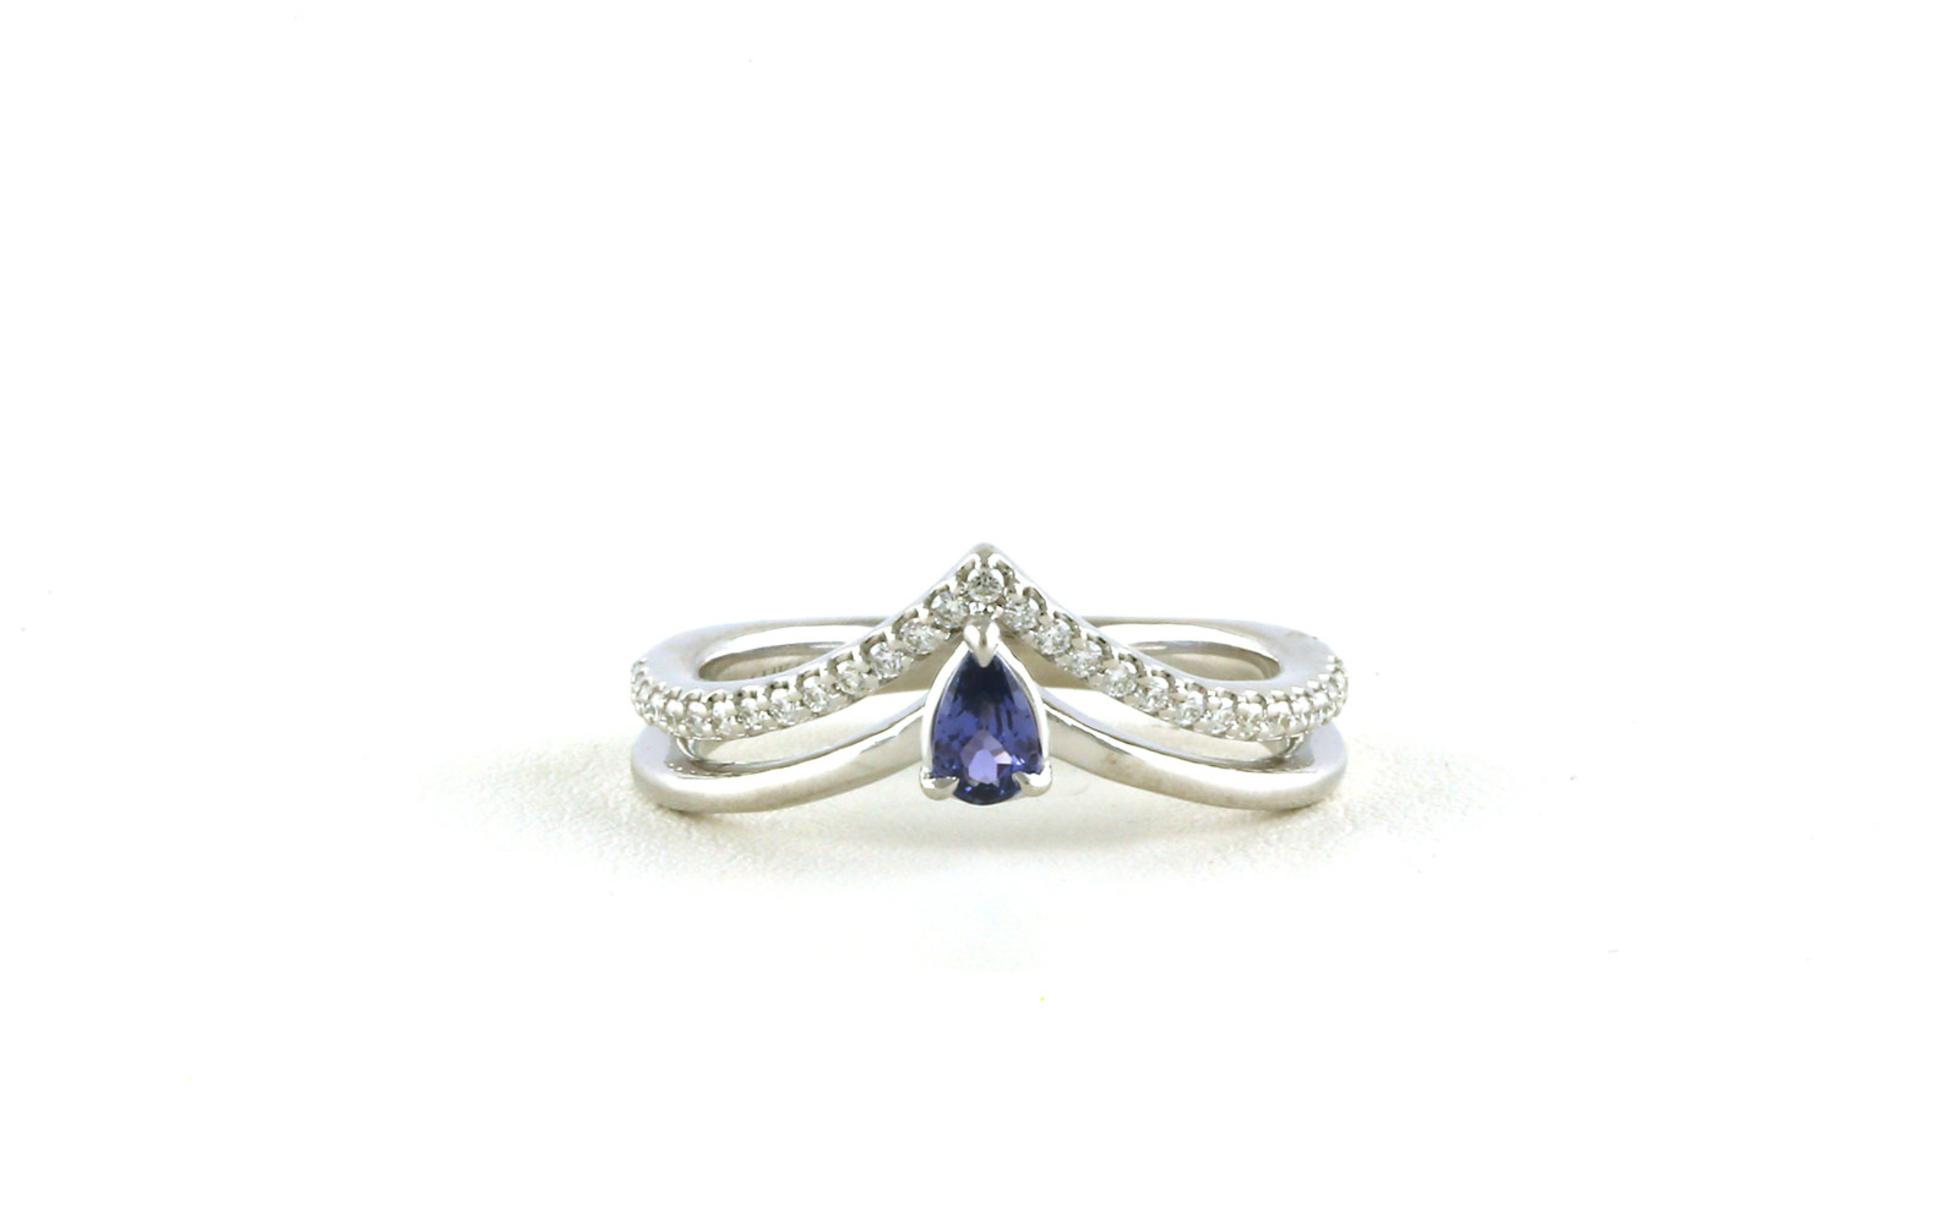 2-Row V-Shape Pear-cut Montana Yogo Sapphire and Diamonds Ring in White Gold (0.23cts)